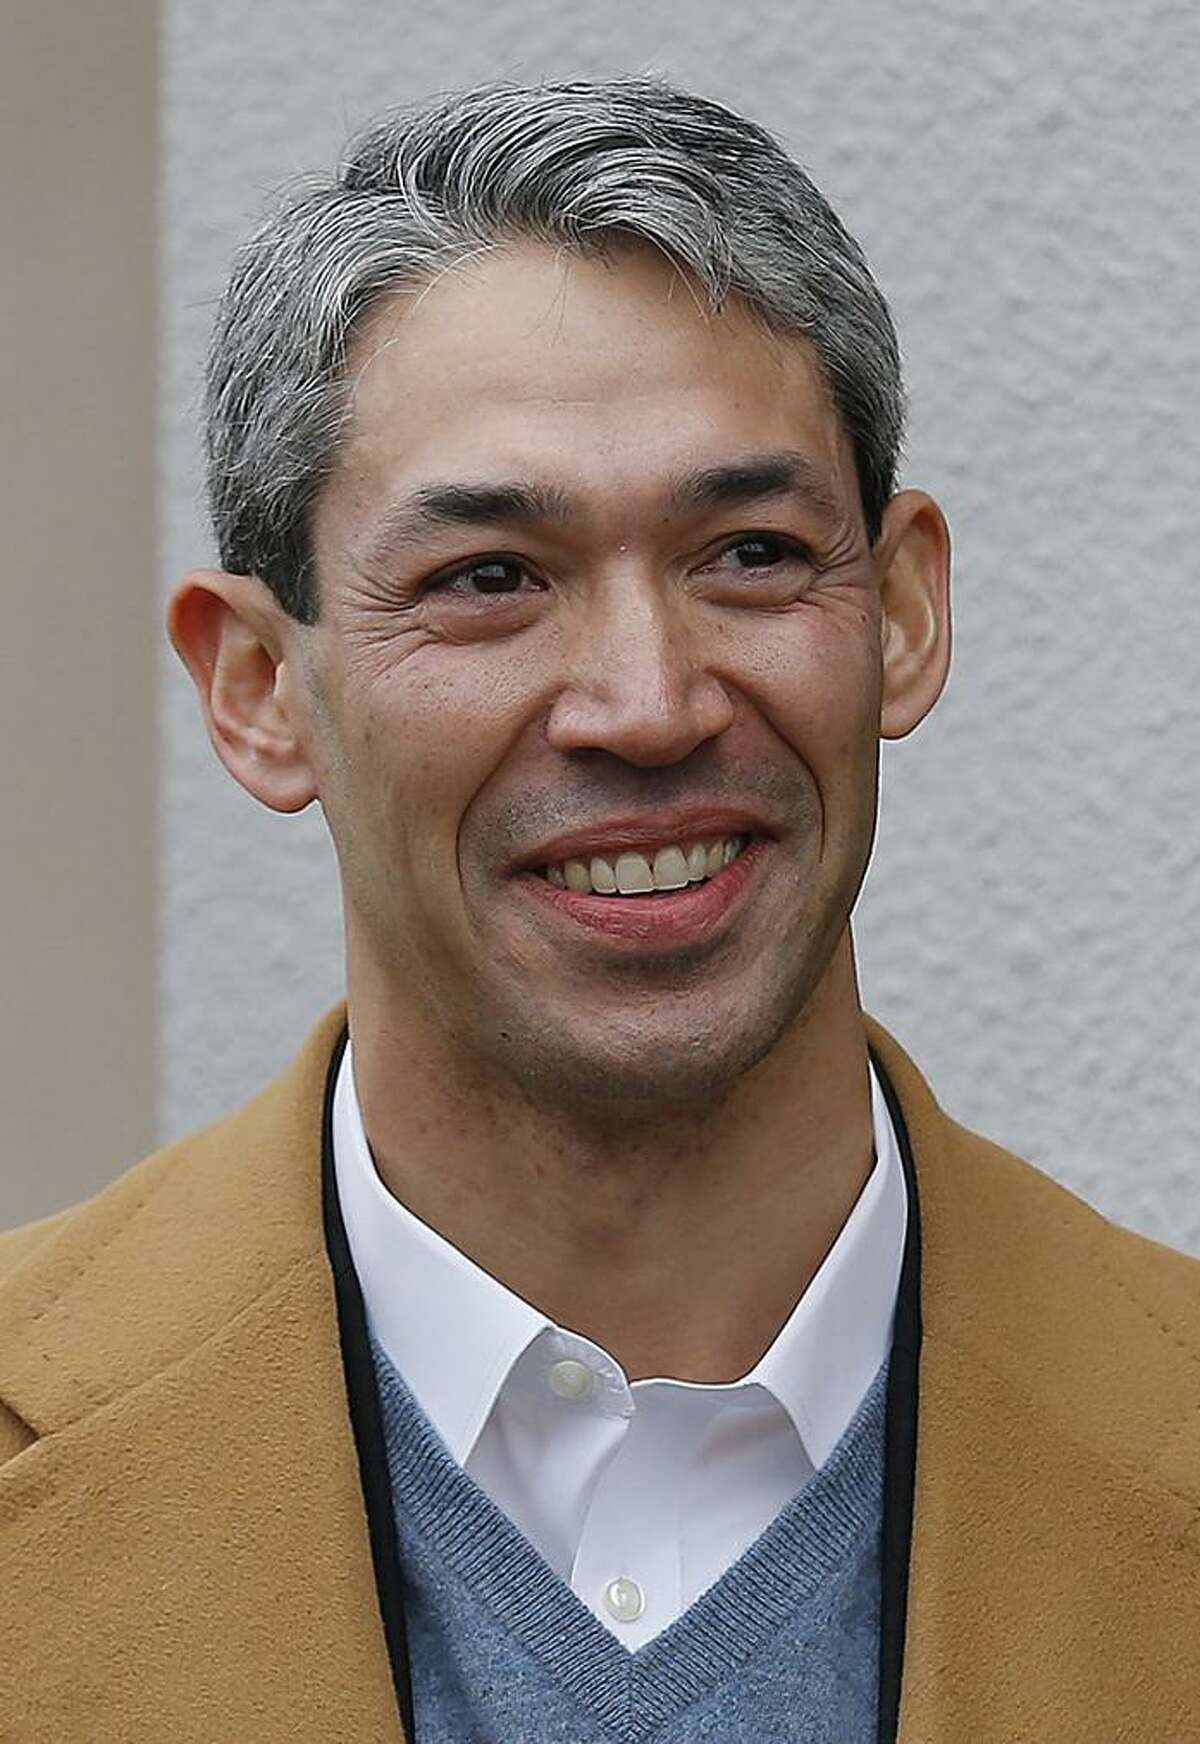 Mayoral candidate Ron Nirenberg is the District 8 councilman.